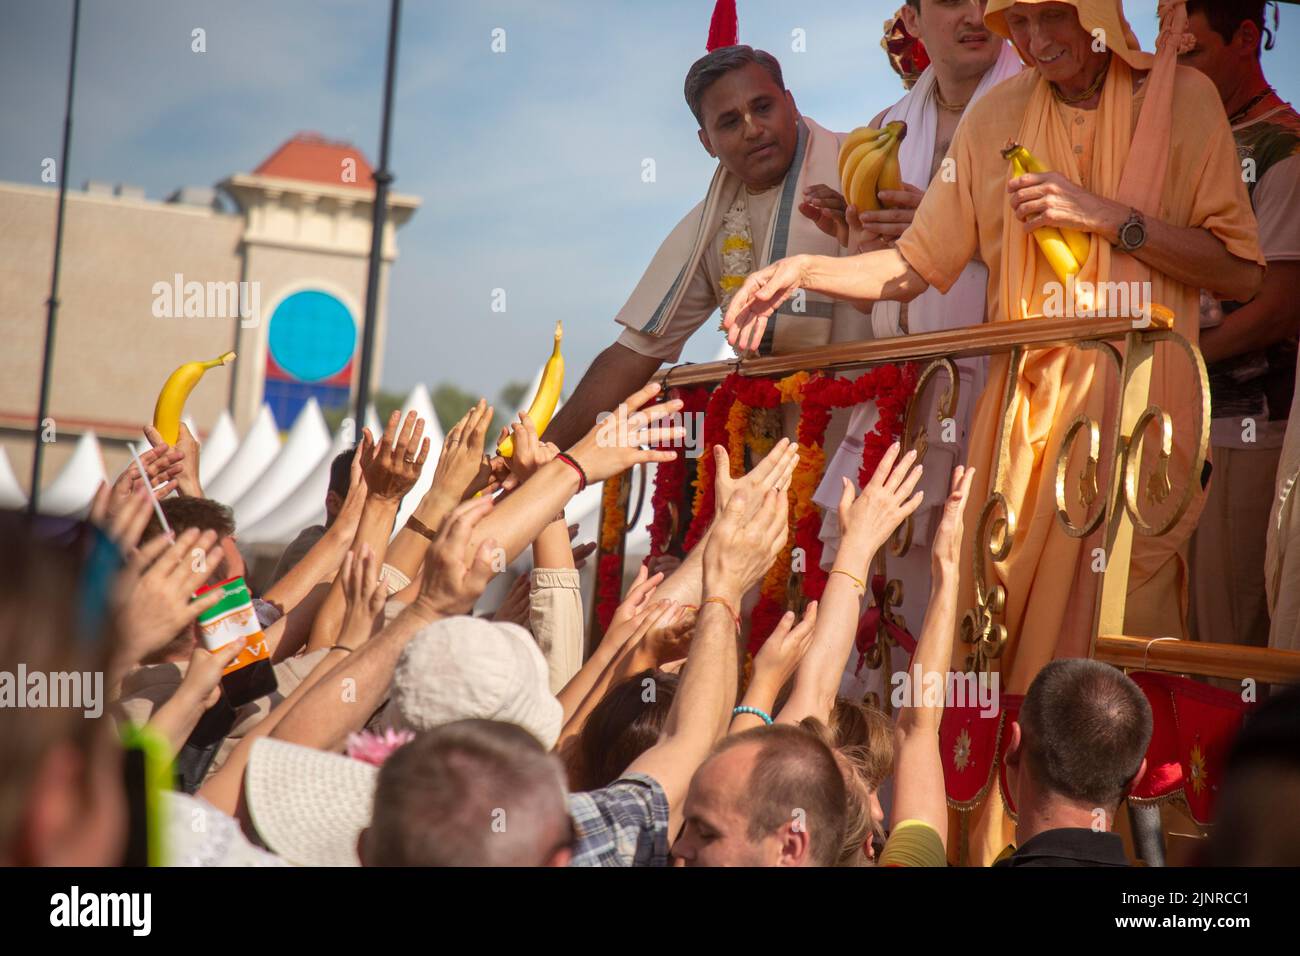 Moscow, Russia. 13th of August, 2022. Сlergy hands out exotic fruits to devotees from the main float cart during the celebration Hare Krishna Ratha Yatra parade, or the Hindu religious Chariot Festival, as part of the India Day festival in the Dream Island Park, Russia Stock Photo